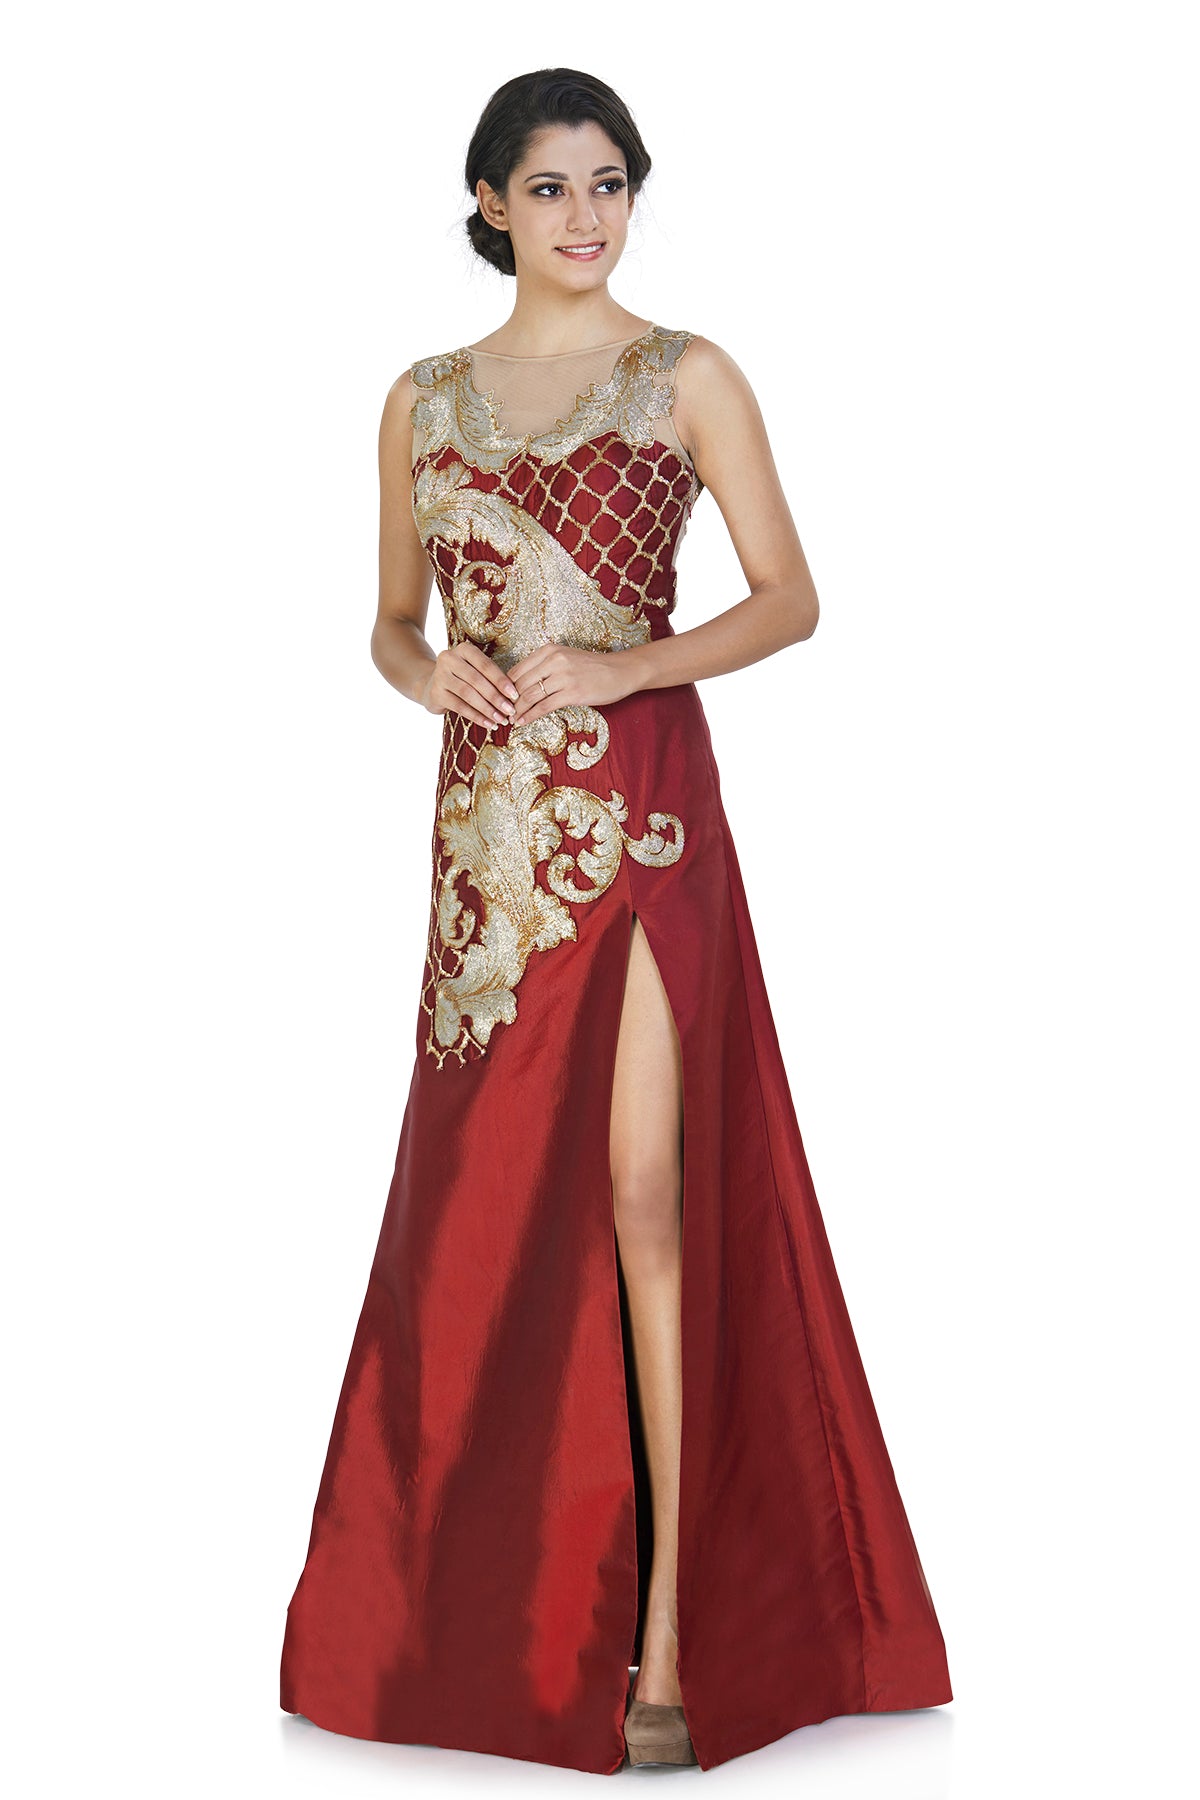 Raise the temperature thigh high with this seductive two-tone silk gown in striking maroon! Its rich kardana embroidery keeps things opulent and all set for your best friend's wedding day.